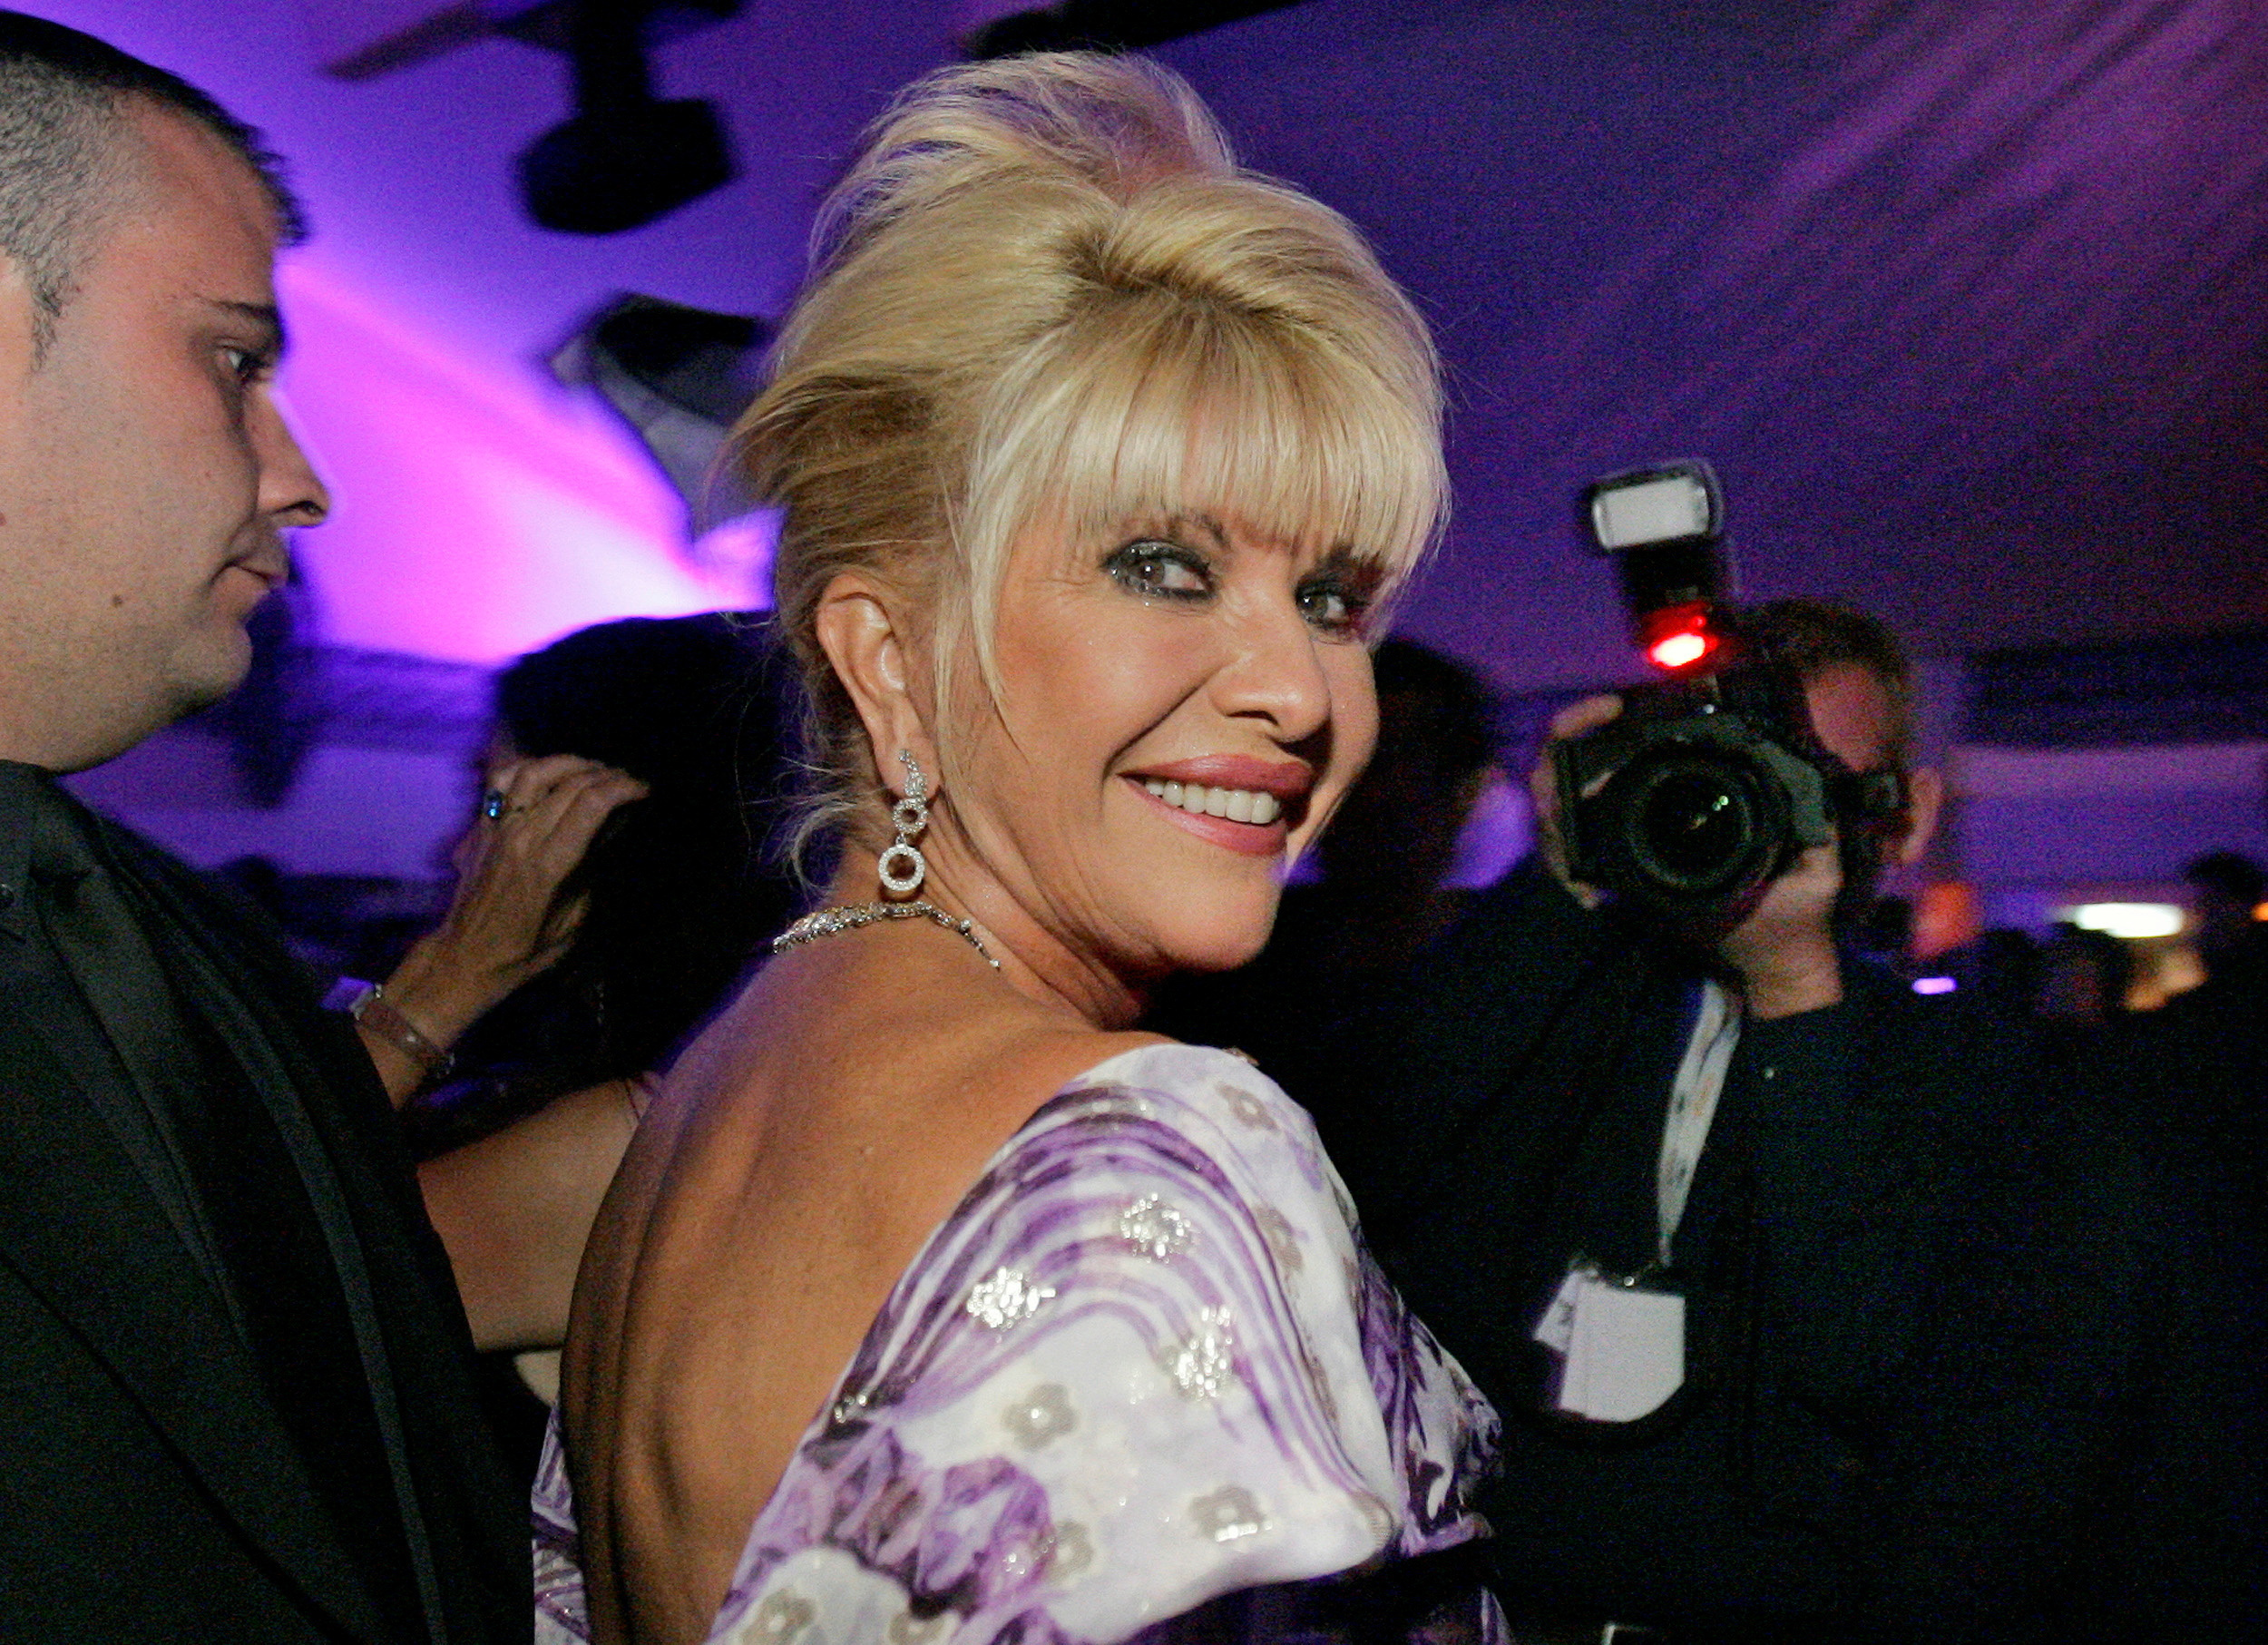 Ivana Trump smiles at her belated birthday party at the Pangaea Soleil club in Cannes